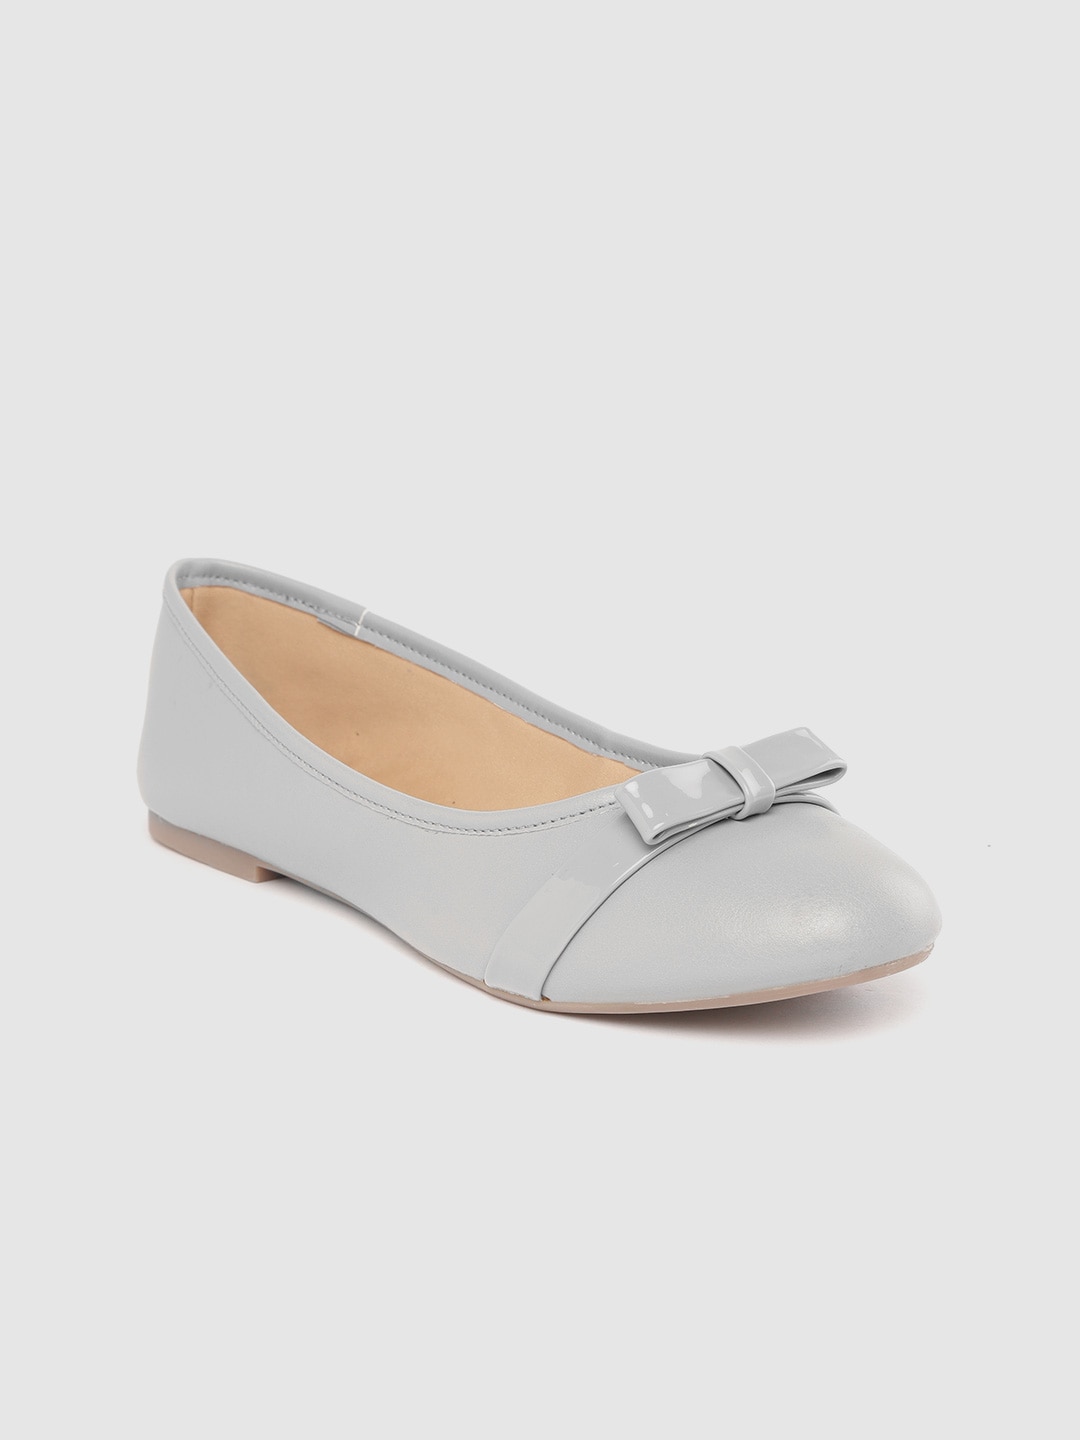 Carlton London Women Grey Solid Ballerinas with Bow Detail Price in India